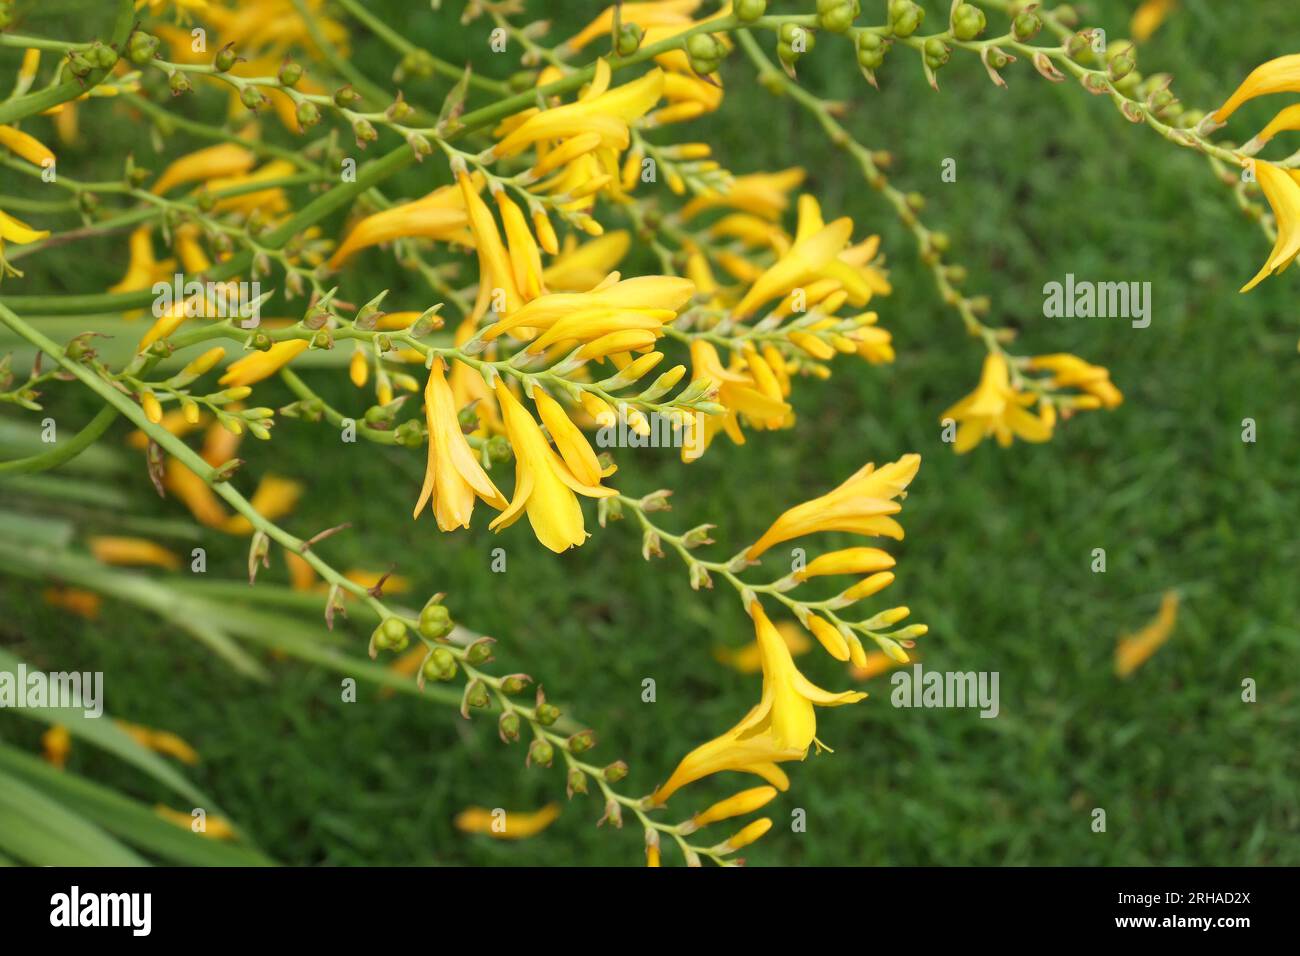 Closeup of the yellow flowers of the summer flowering herbaceous perennial garden plant Crocosmia Suzanna or Montbretia. Stock Photo